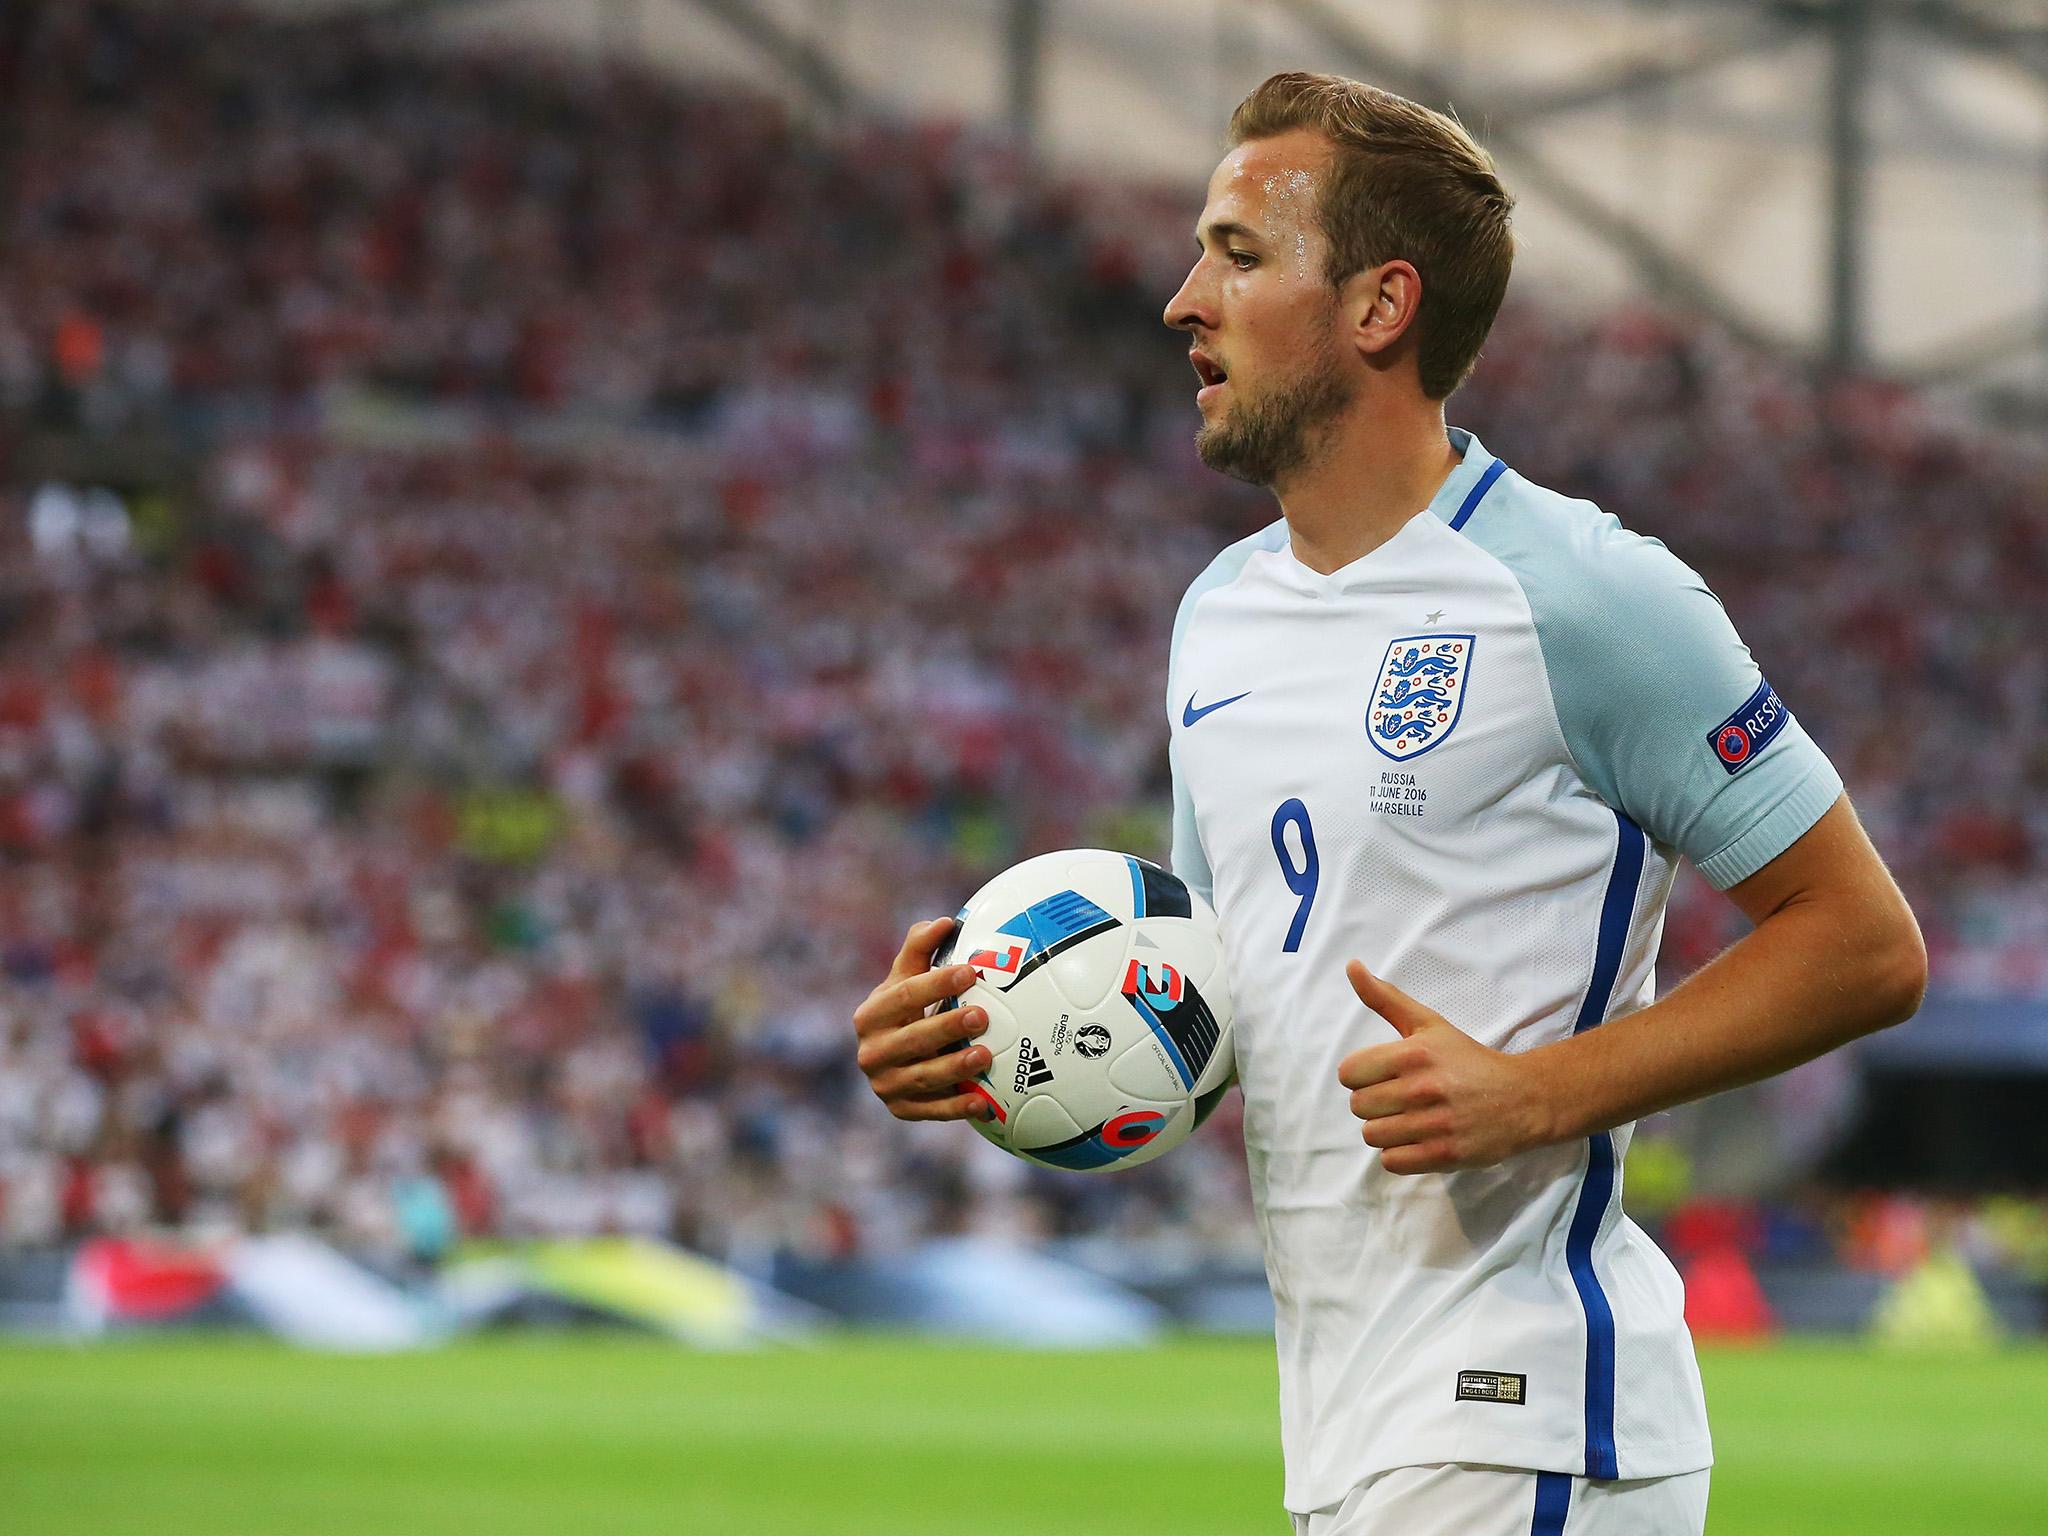 Kane will return to White Hart Lane after being an unused substitute for England on Friday